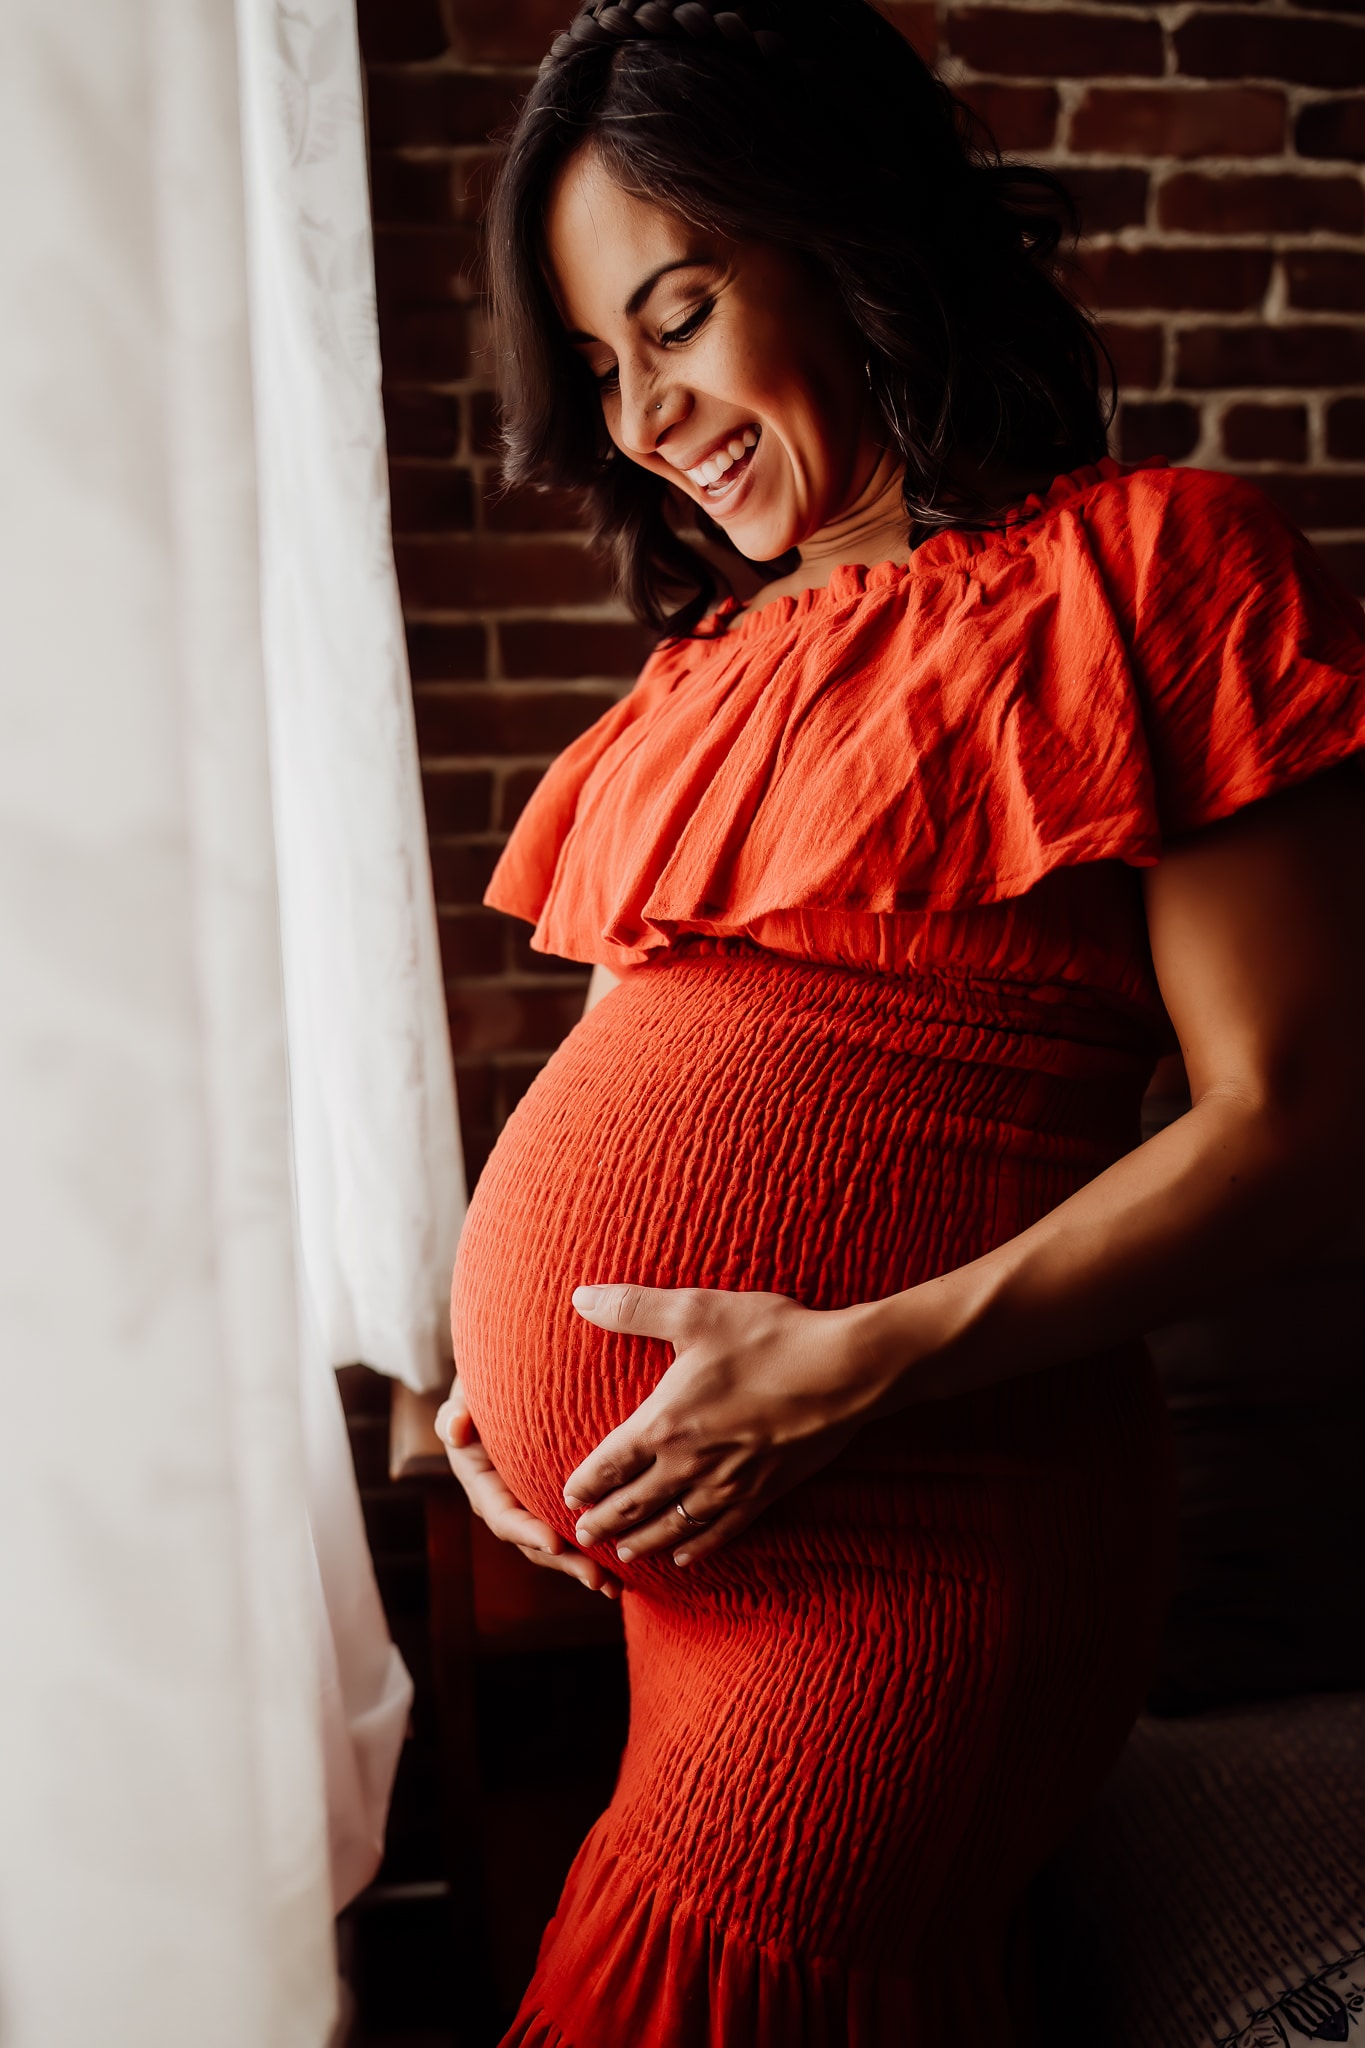 Woman smiling at her pregnant belly wearing a festive red dress